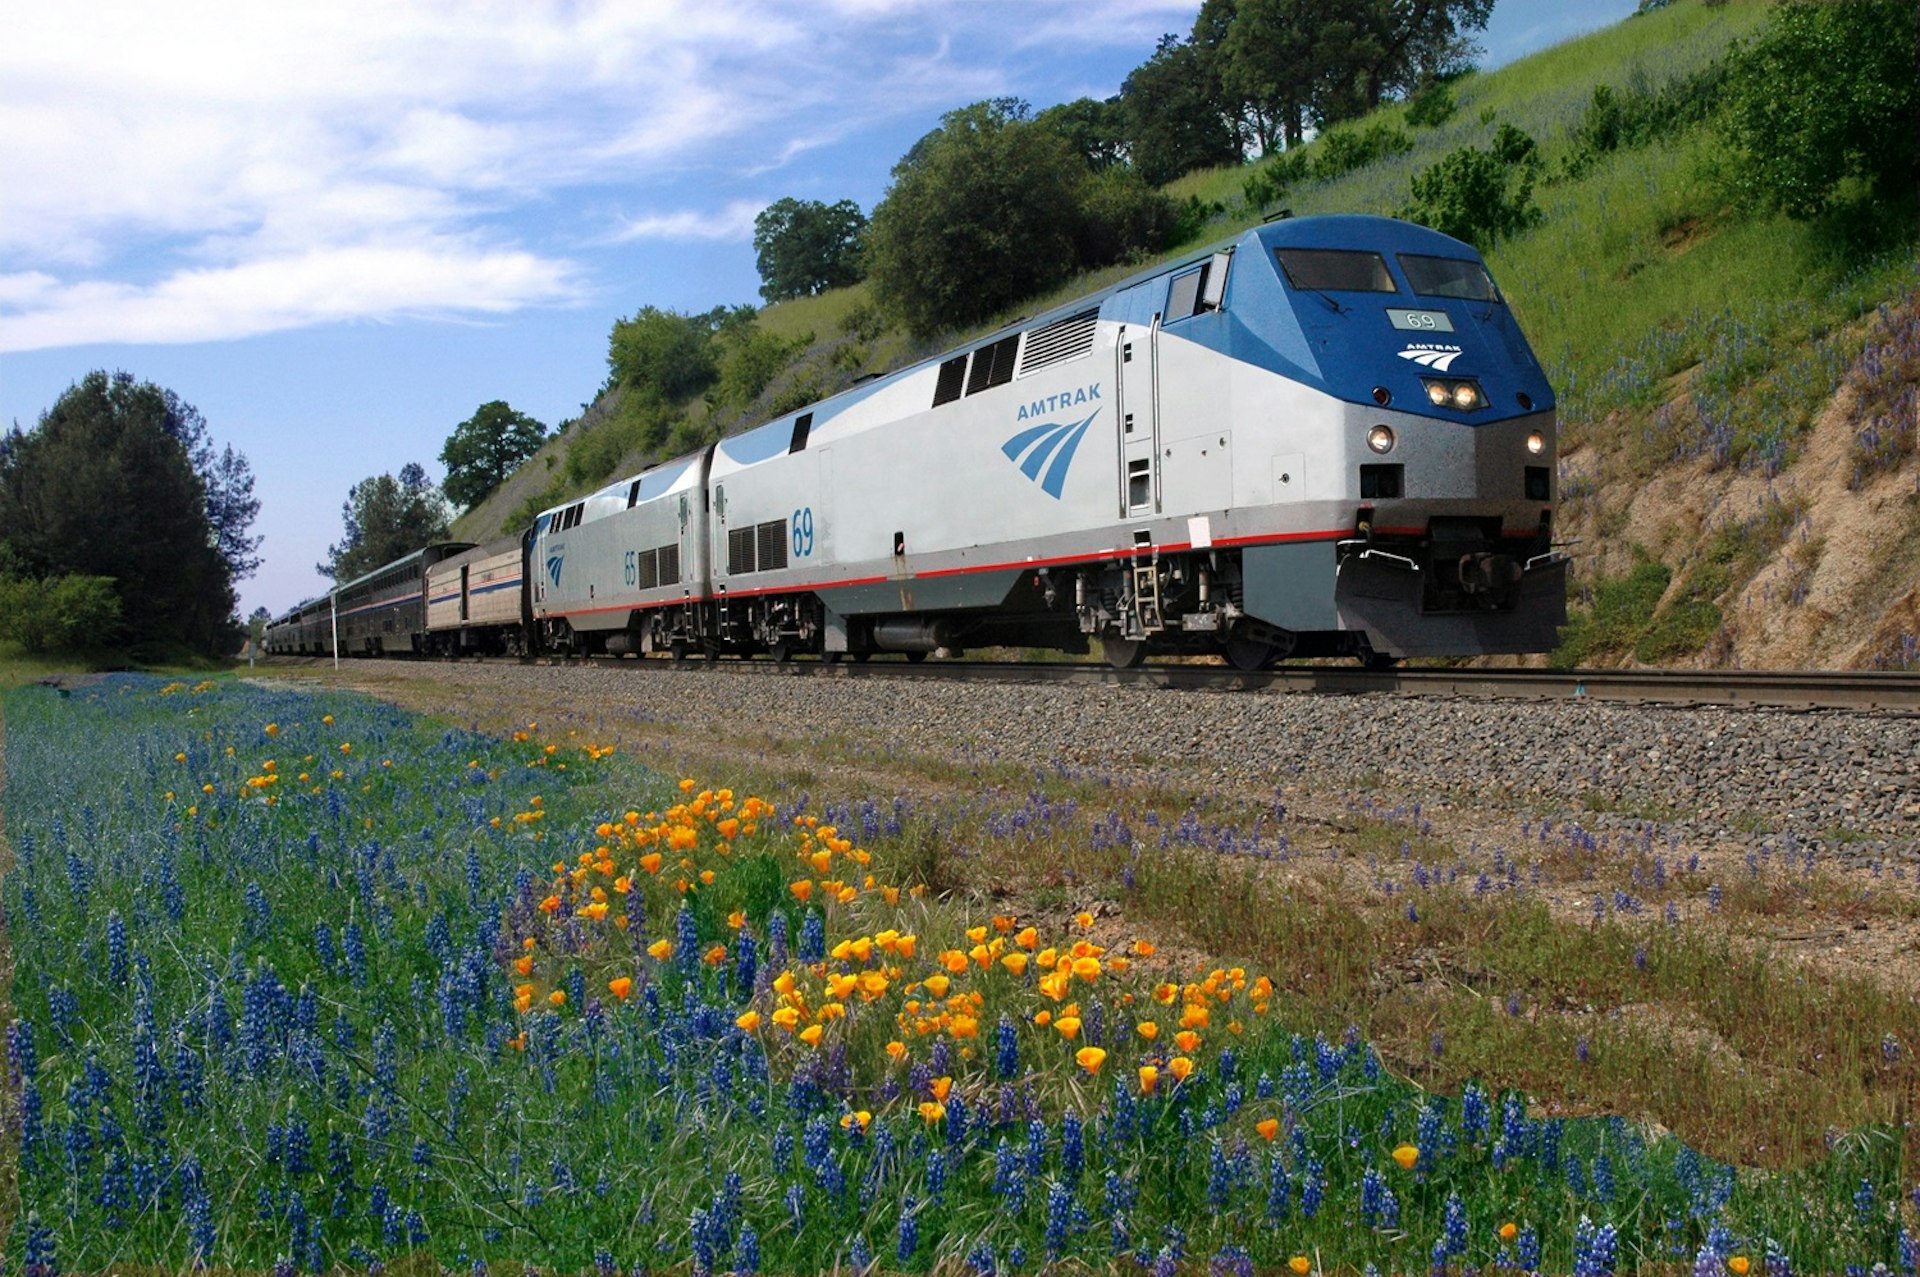 The California Zephyr train passes trackside wild flowers in the US